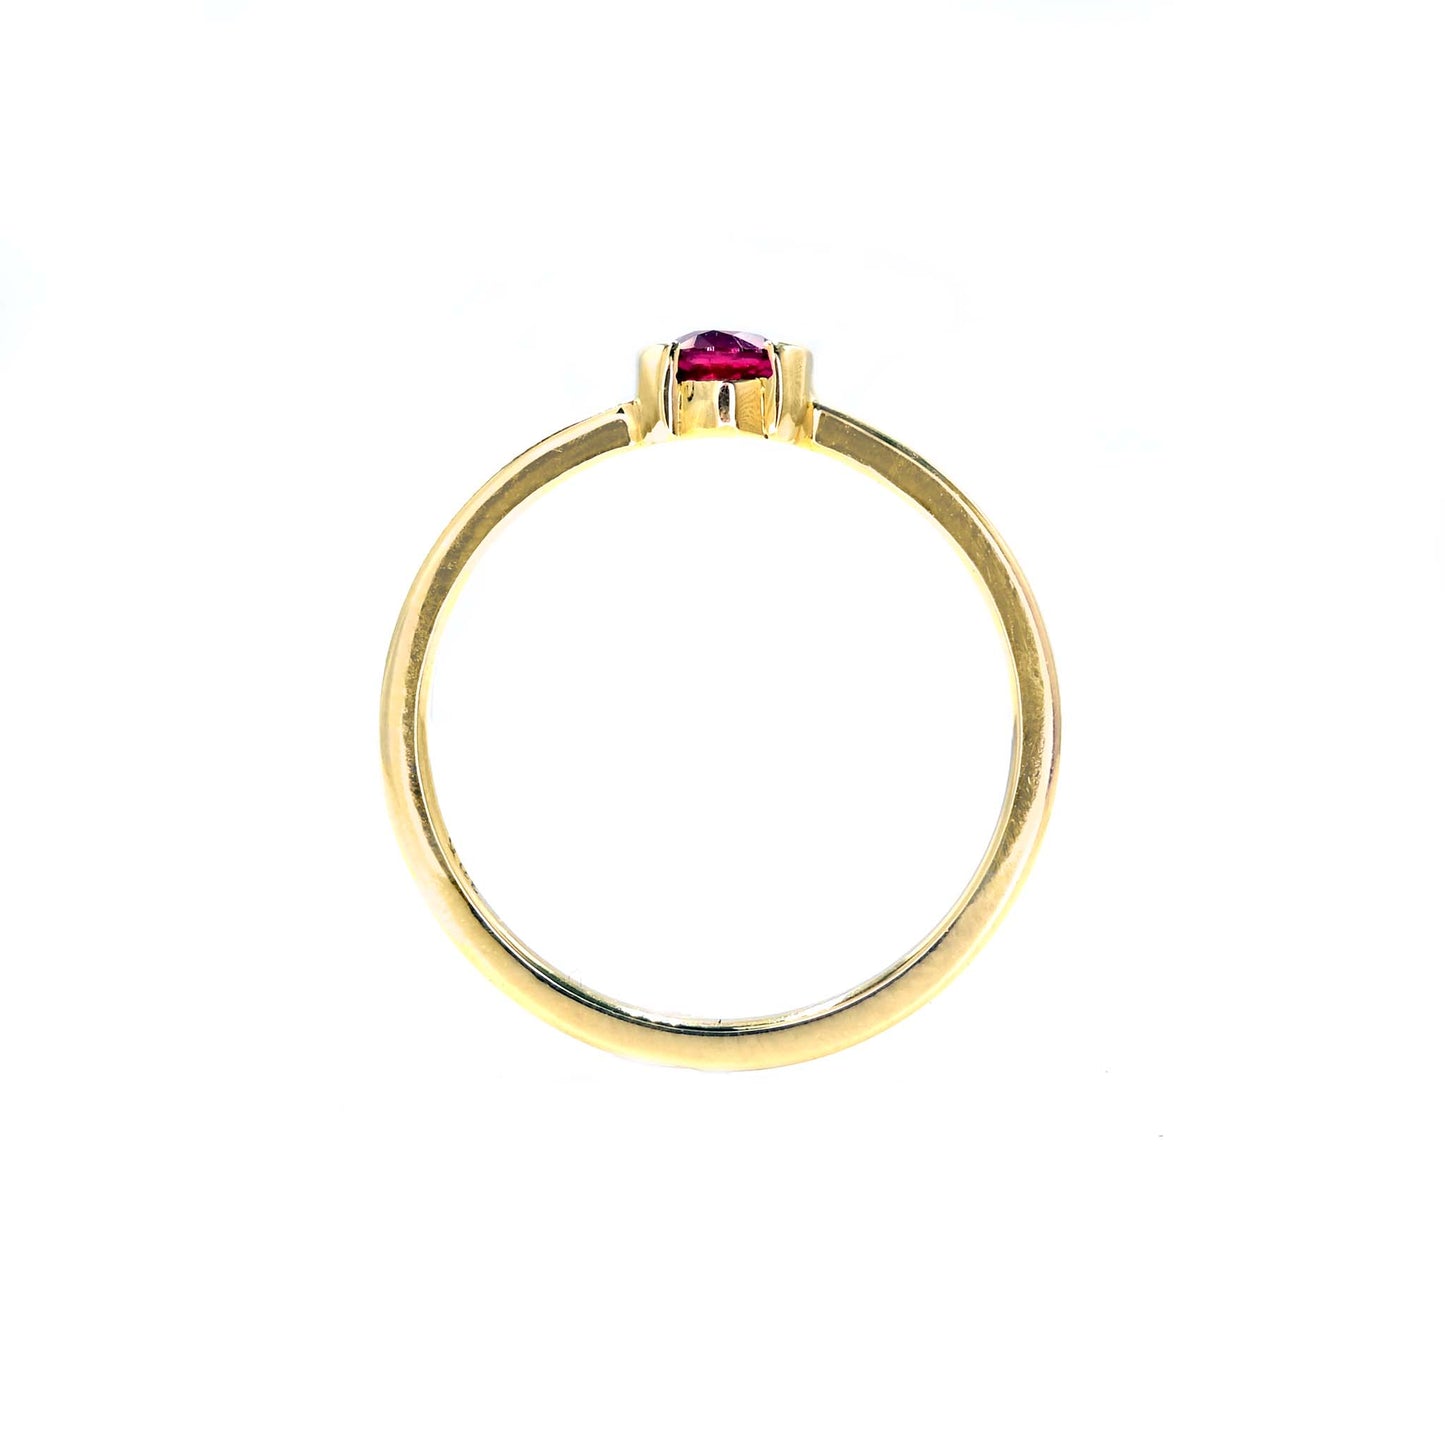 Stunning ruby ring custom made for you from Chiang Mai, Thailand